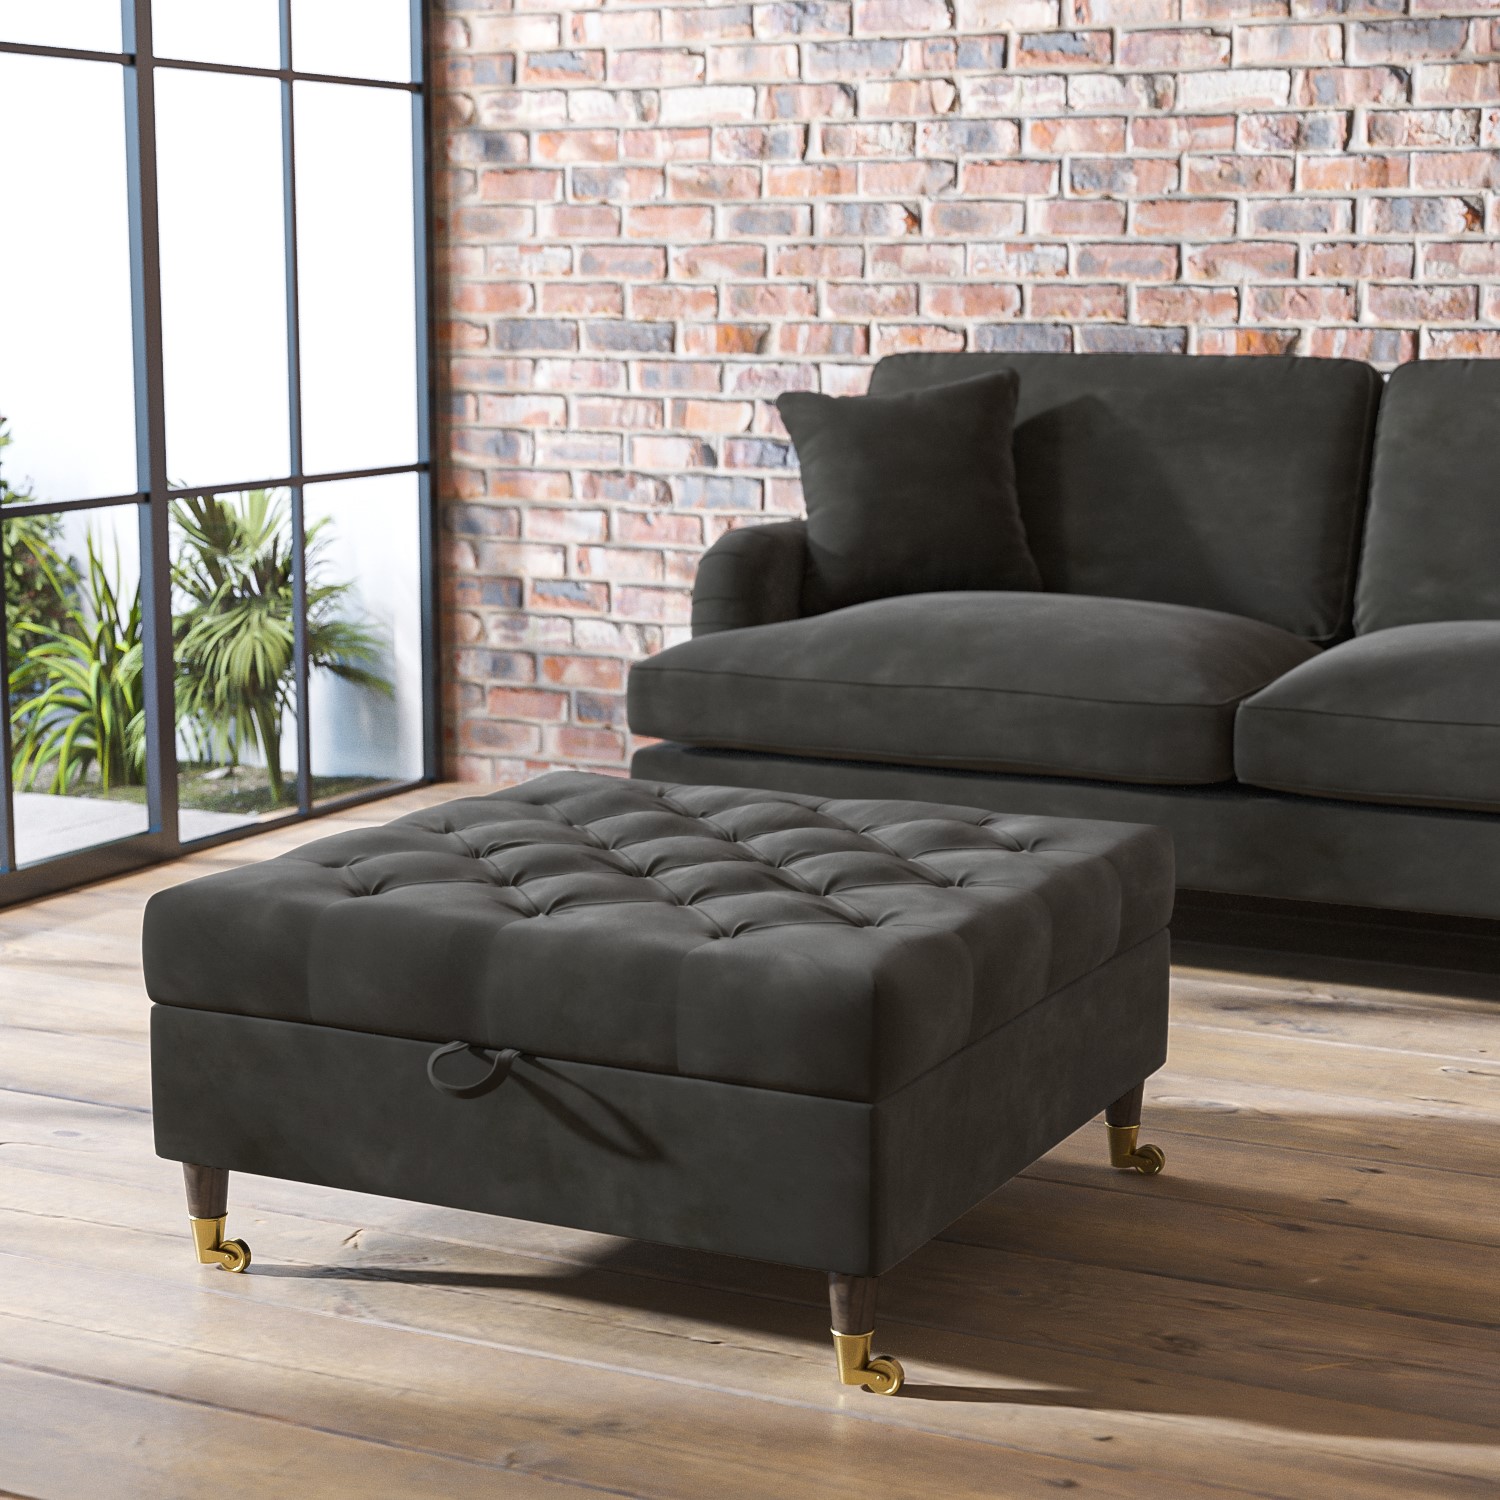 Read more about Large dark grey velvet chesterfield footstool with storage payton